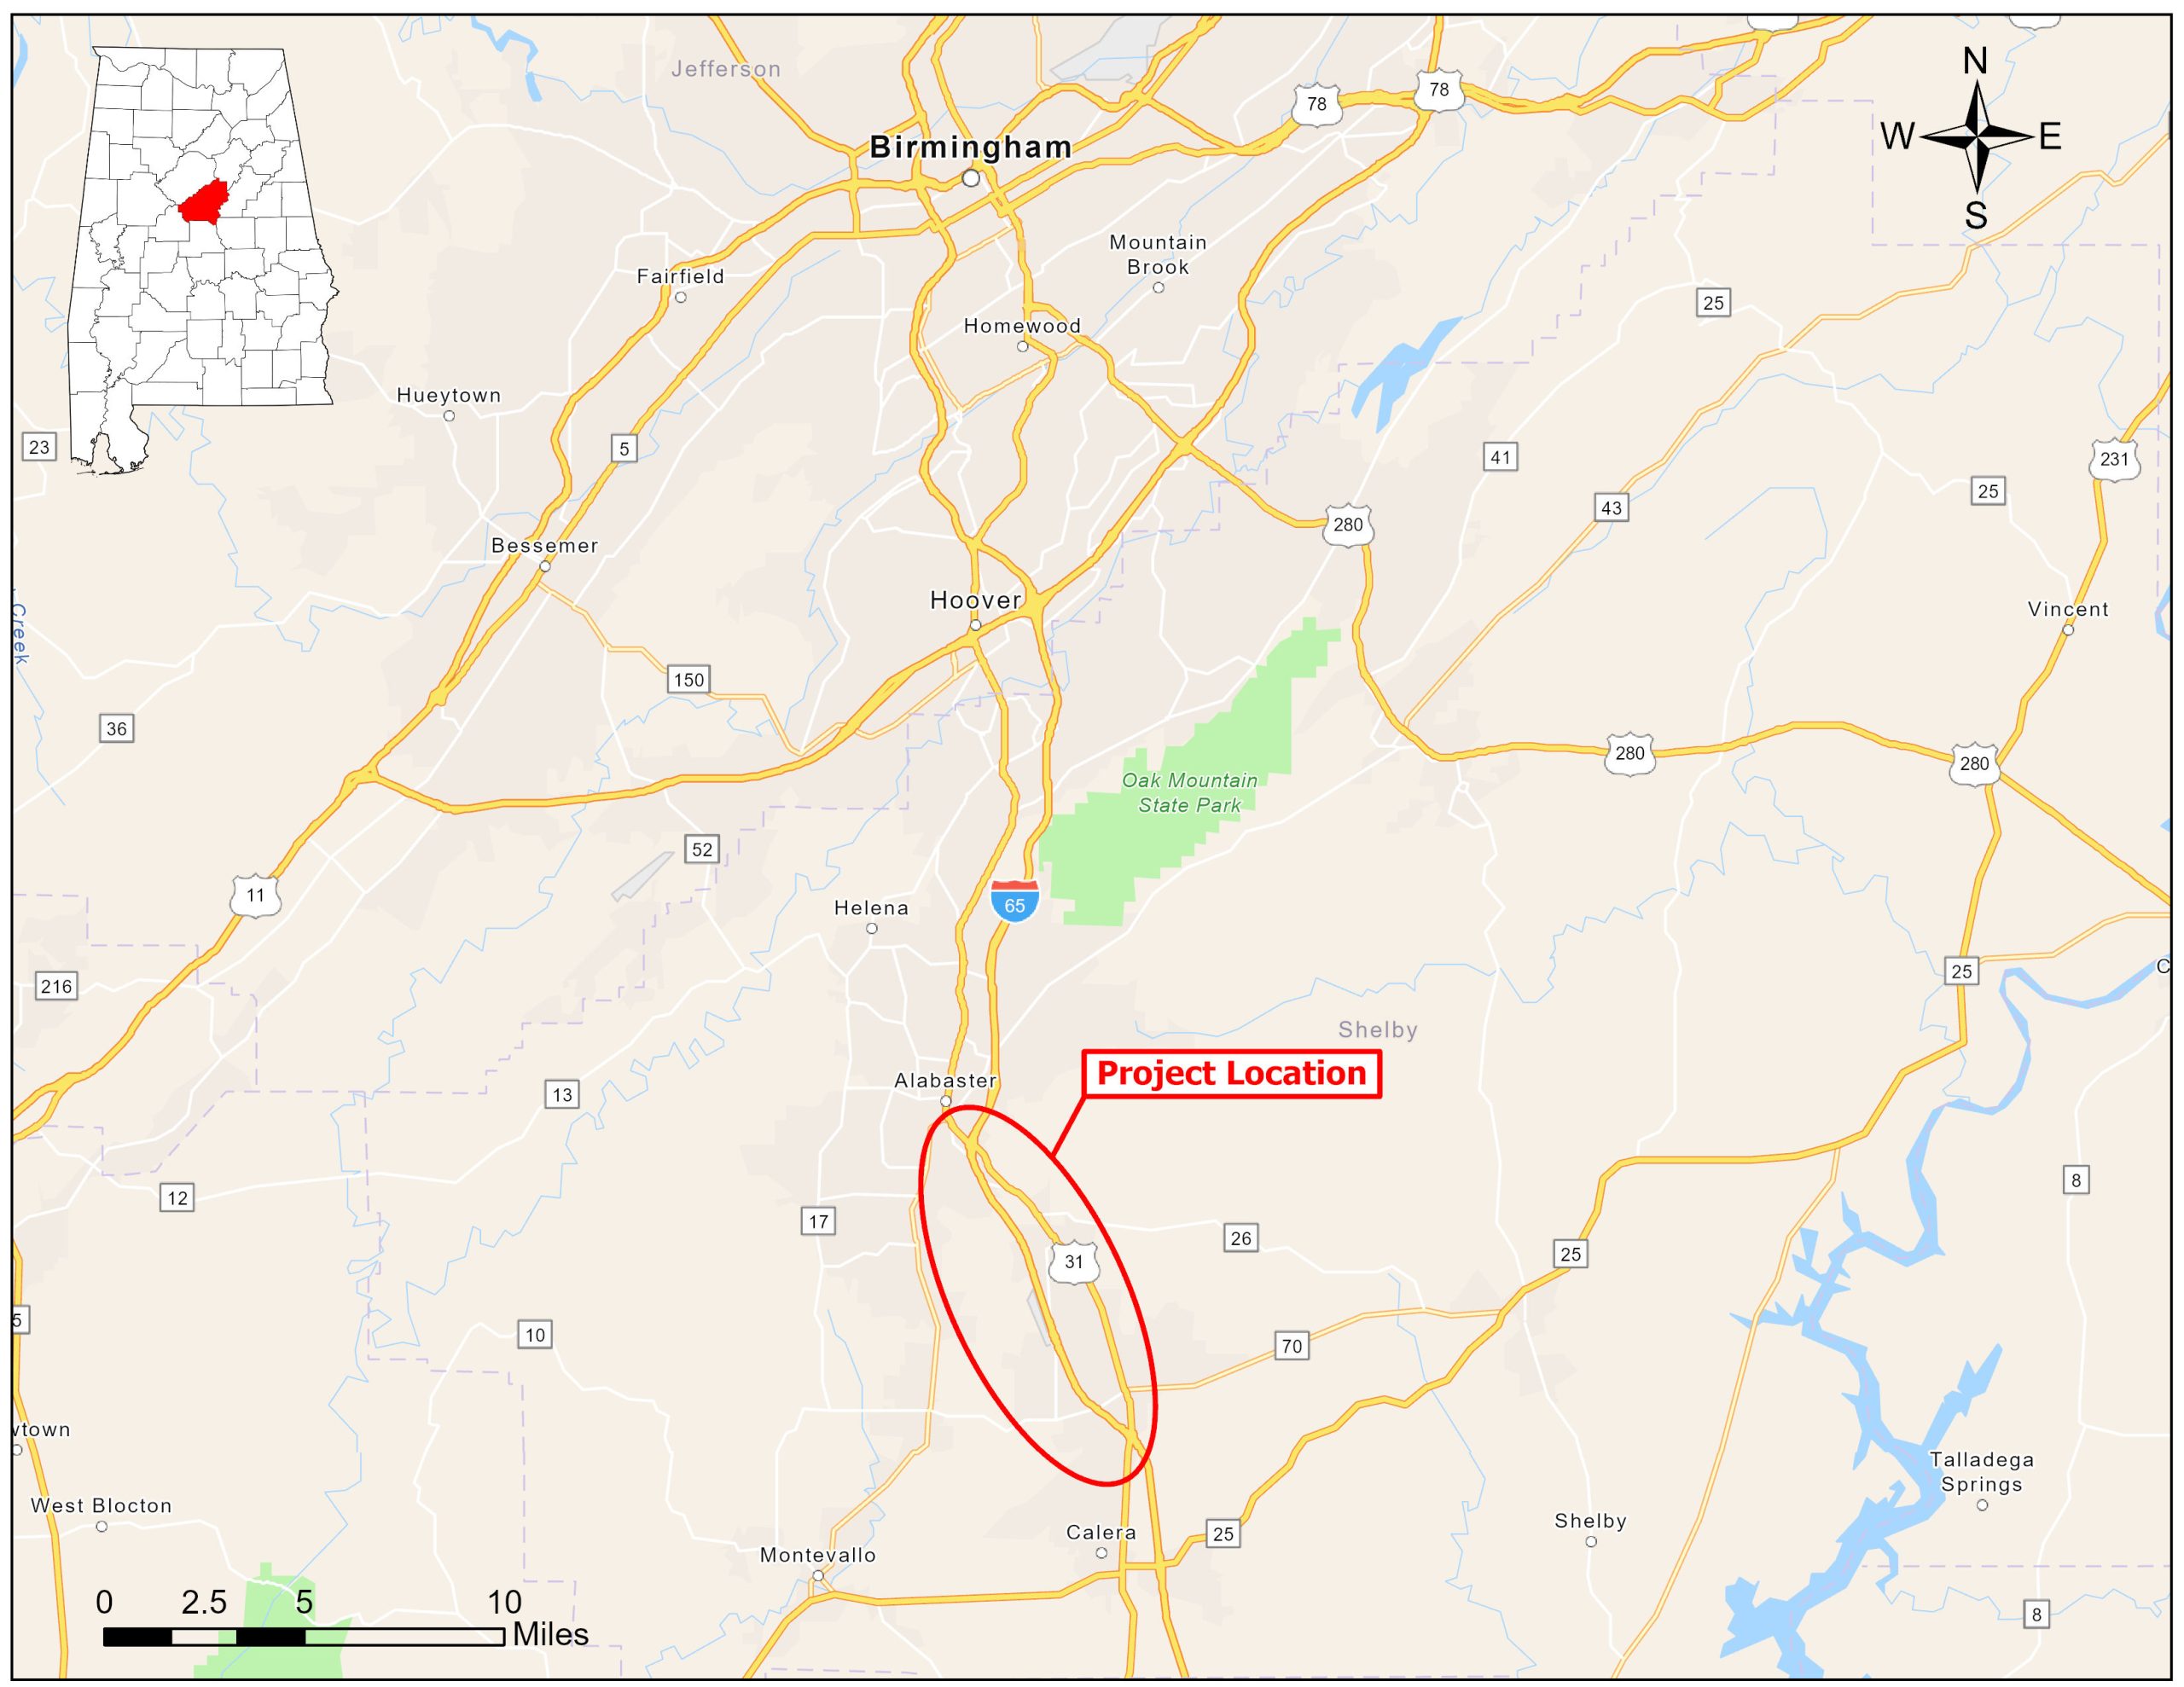 Map of the proposed portion of I-65 to be widened in Shelby County.